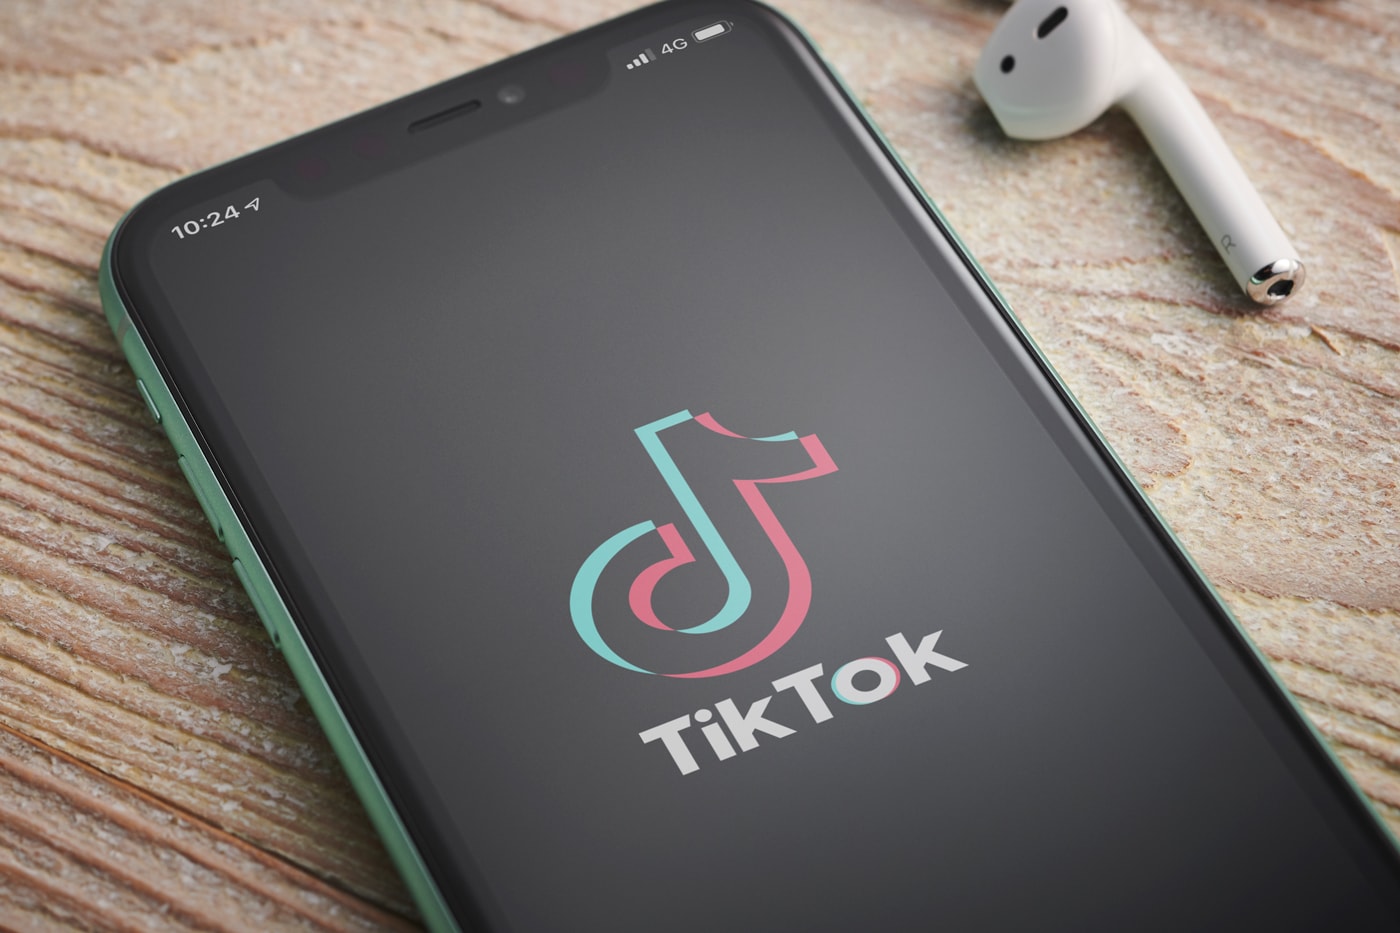 Microsoft Continues Talk Buy Tiktok After Consulting Donald Trump Info Bytedance China Price Buy